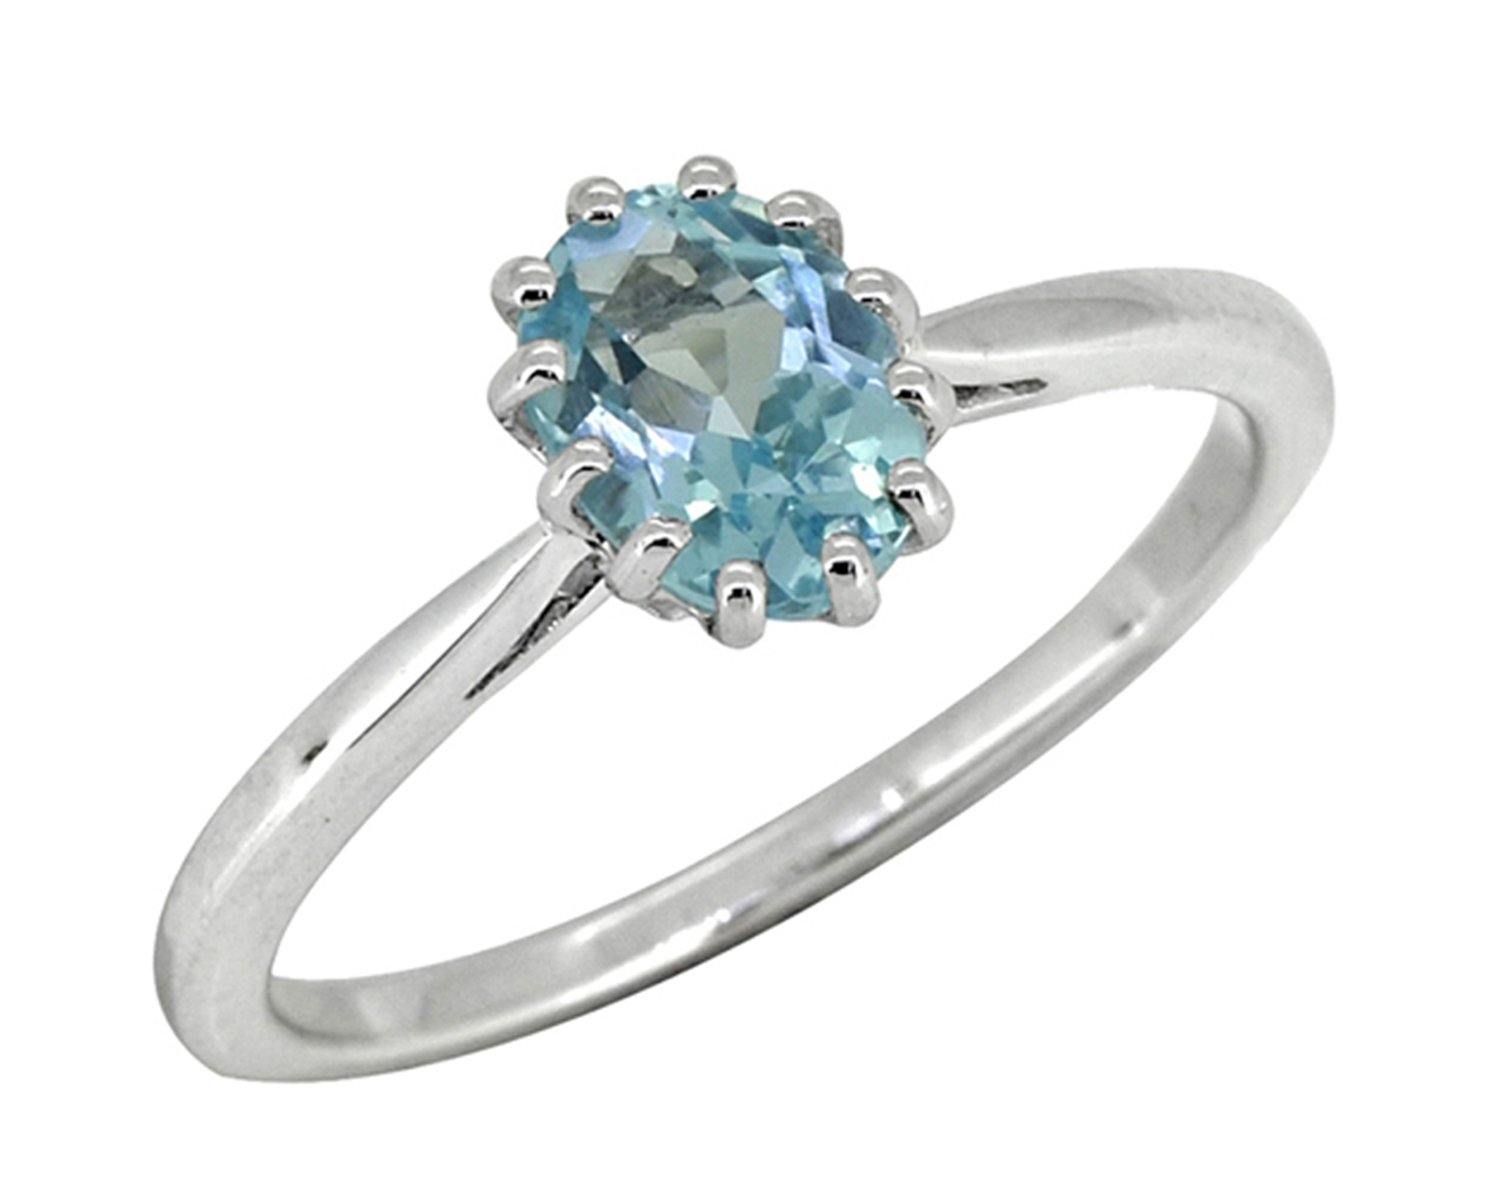 1.05 Ct Blue Topaz Solid 925 Sterling Silver Ring Jewelry - YoTreasure